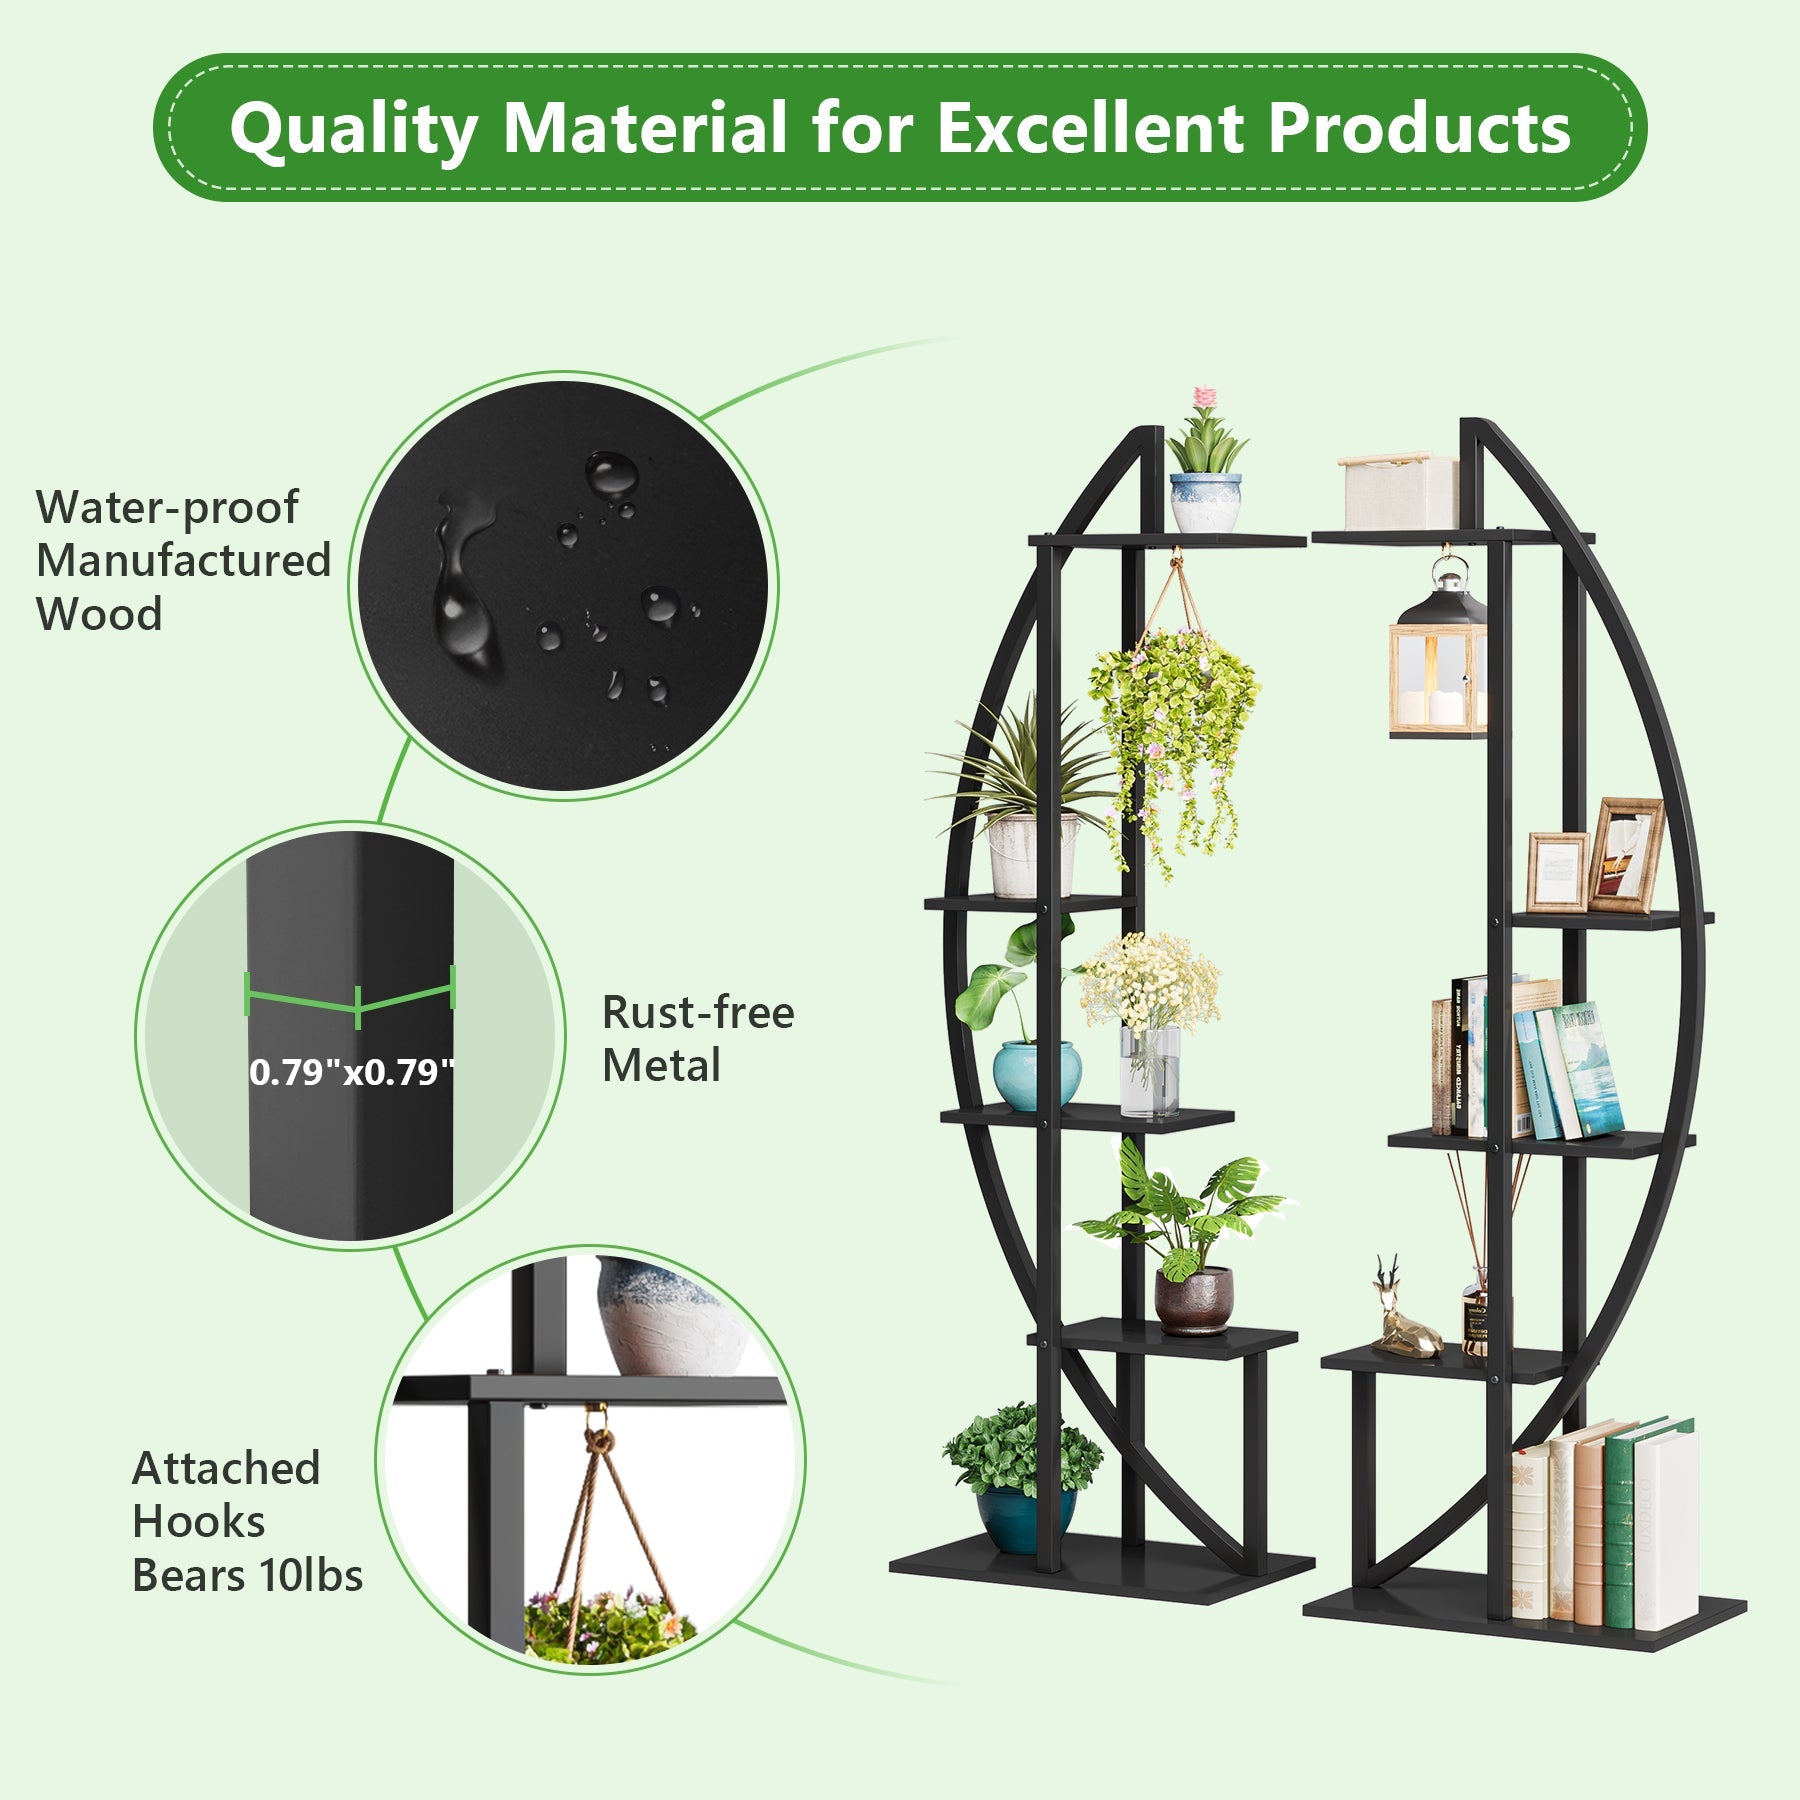 Curved Plant Stand Pack of 2, 5-Tier Flower Display Shelf